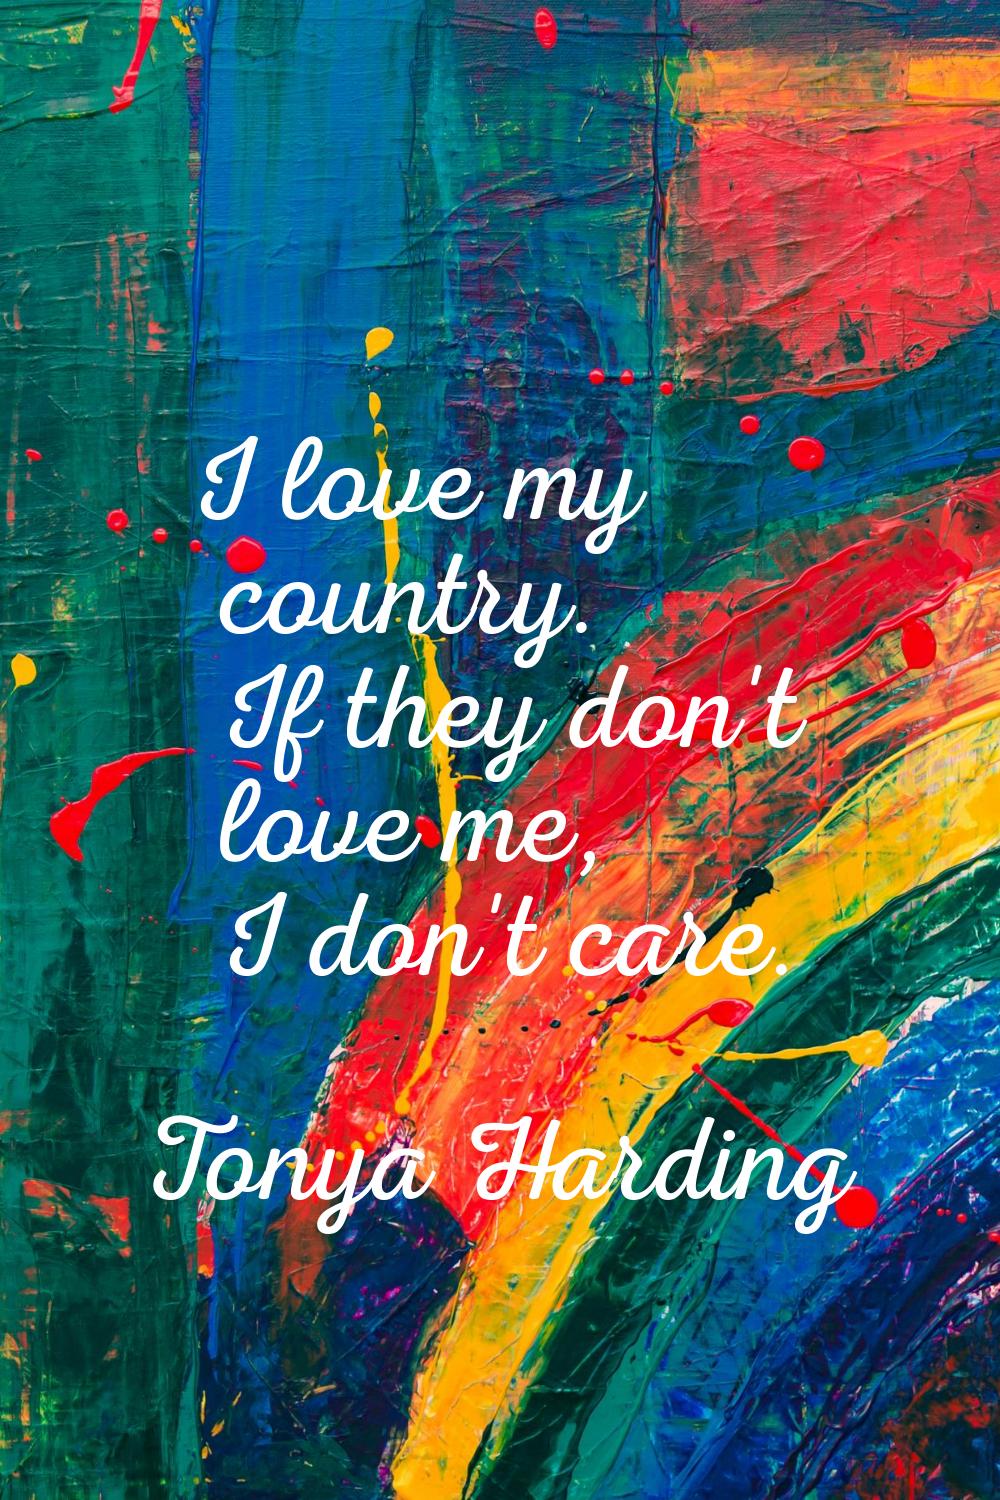 I love my country. If they don't love me, I don't care.